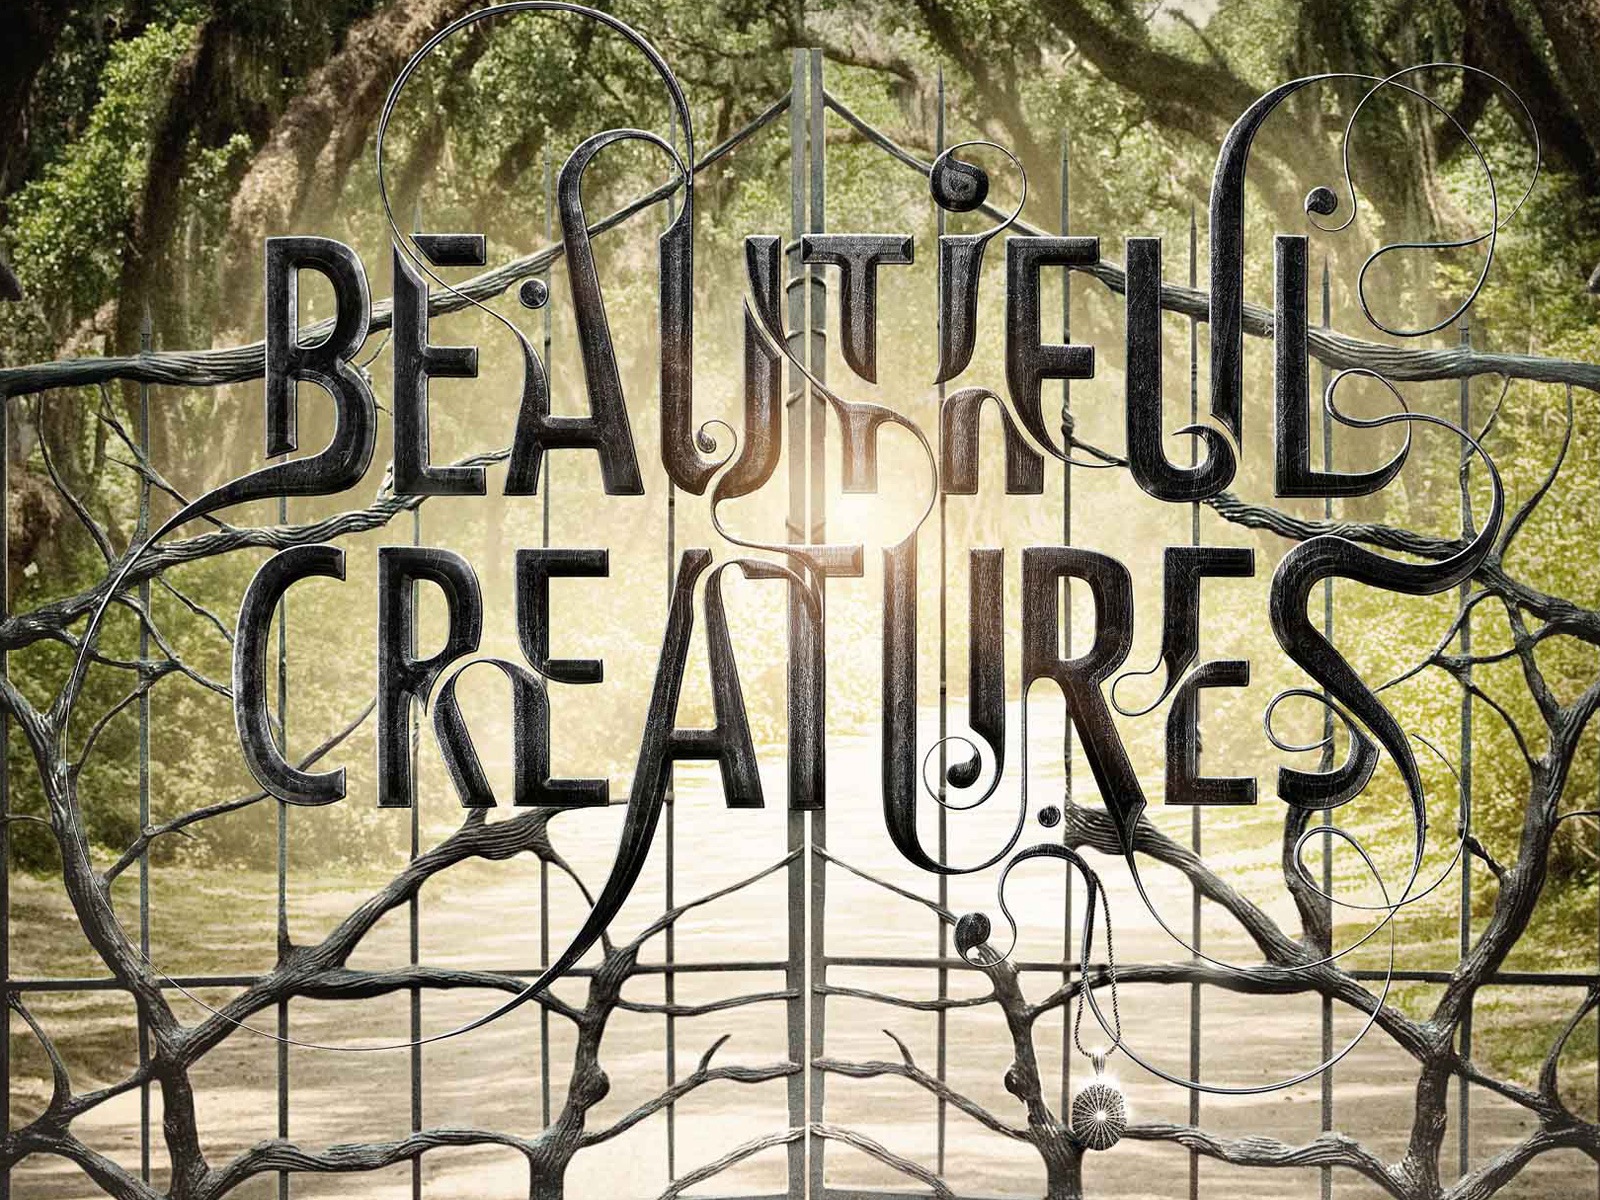 Beautiful Creatures 2013 HD movie wallpapers #3 - 1600x1200